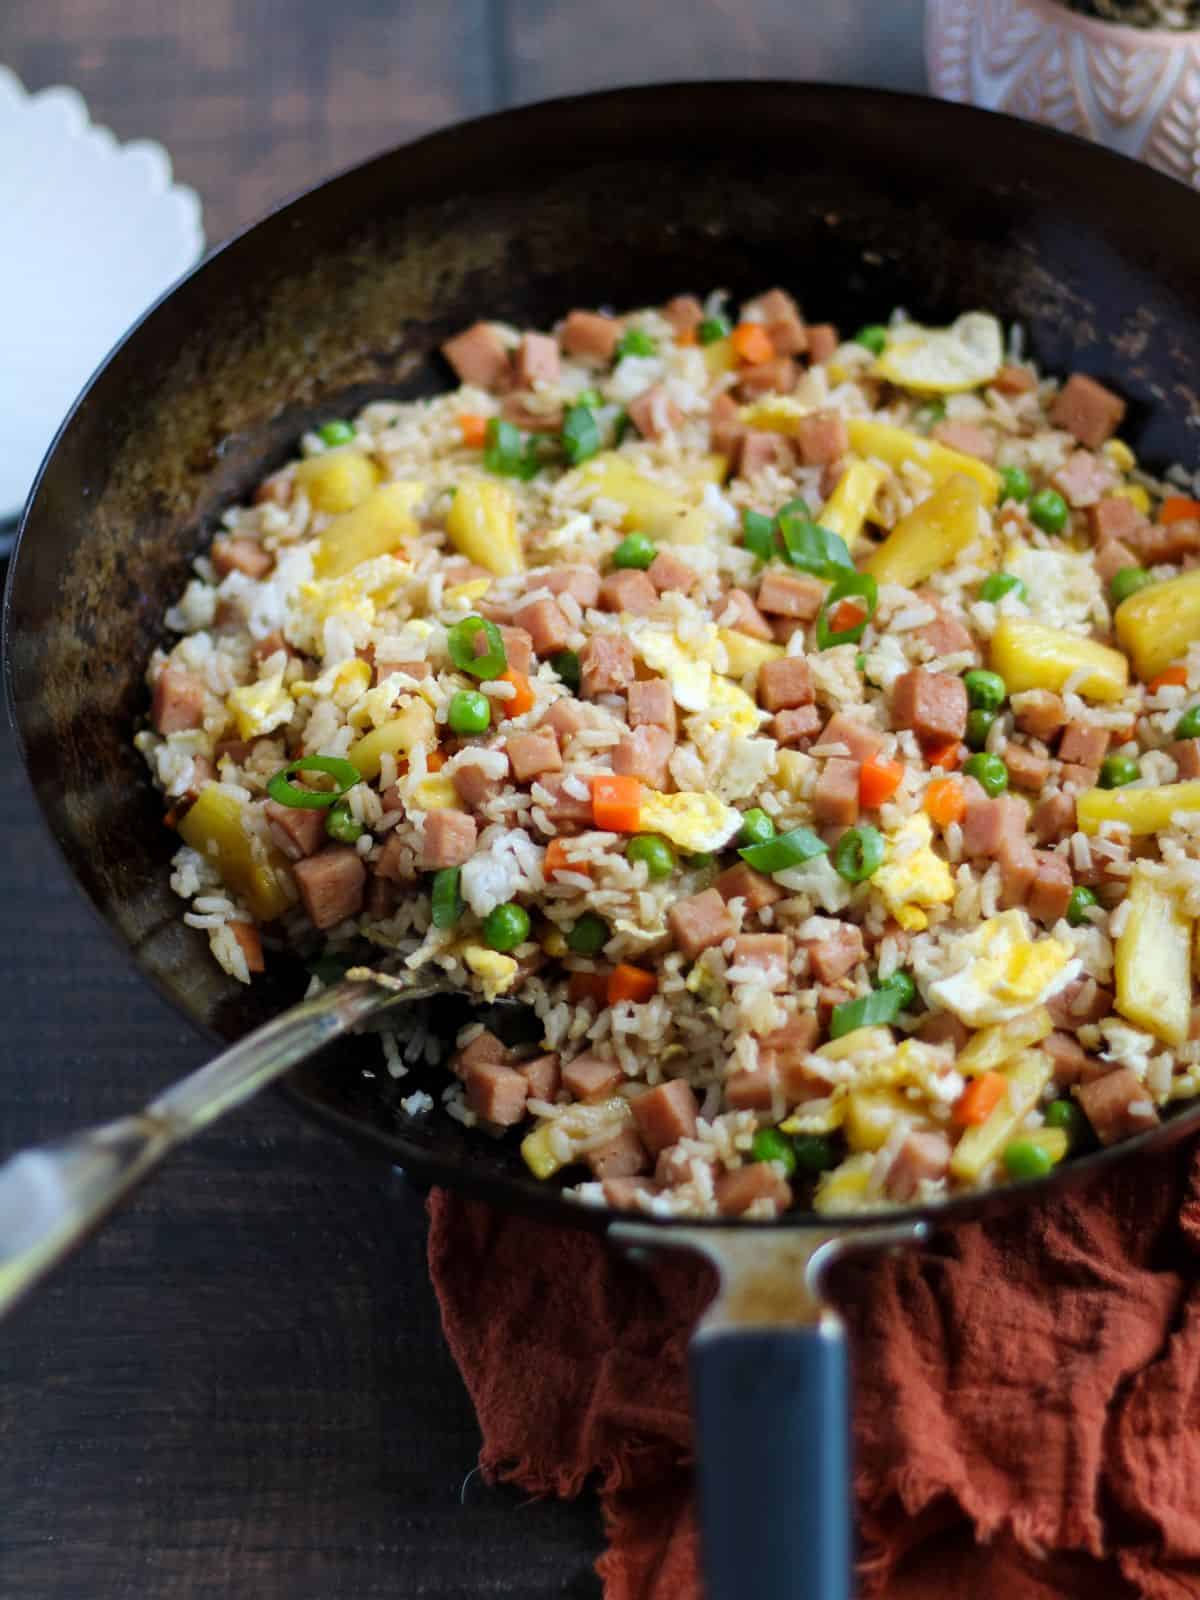 Cooked fried rice in a wok.